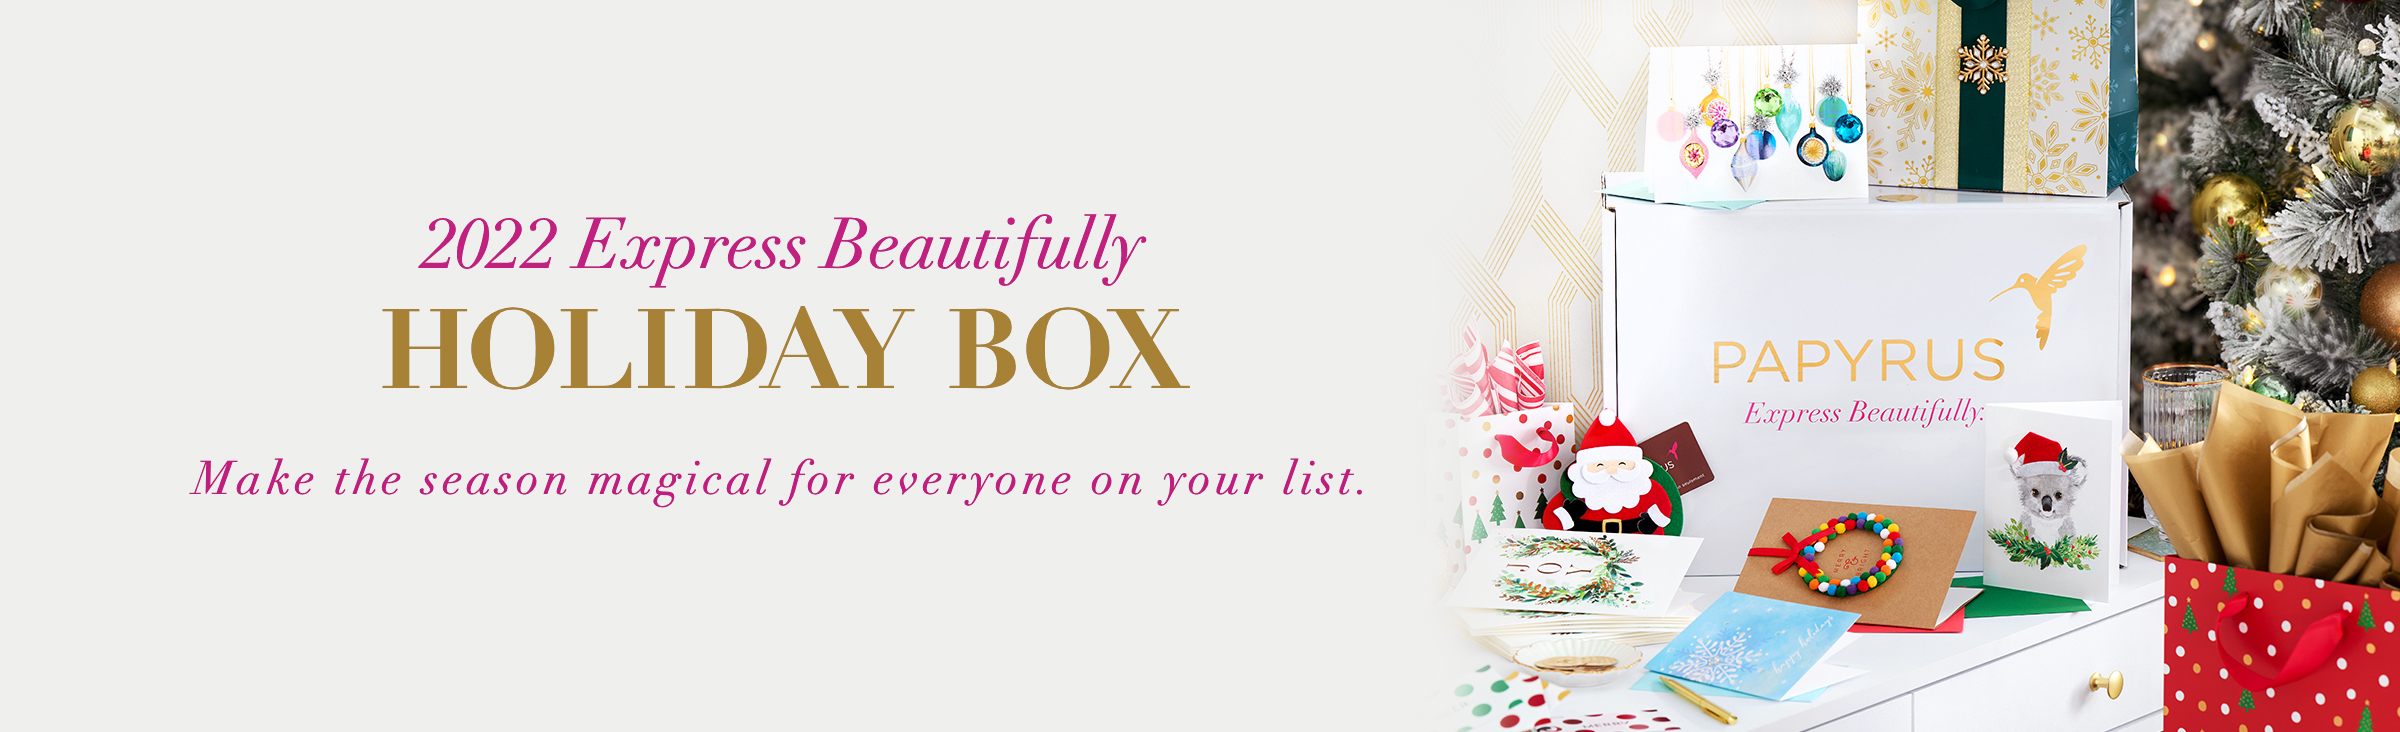 2022 Express Beautifully Holiday Box Make the season magical for everyone on your list.